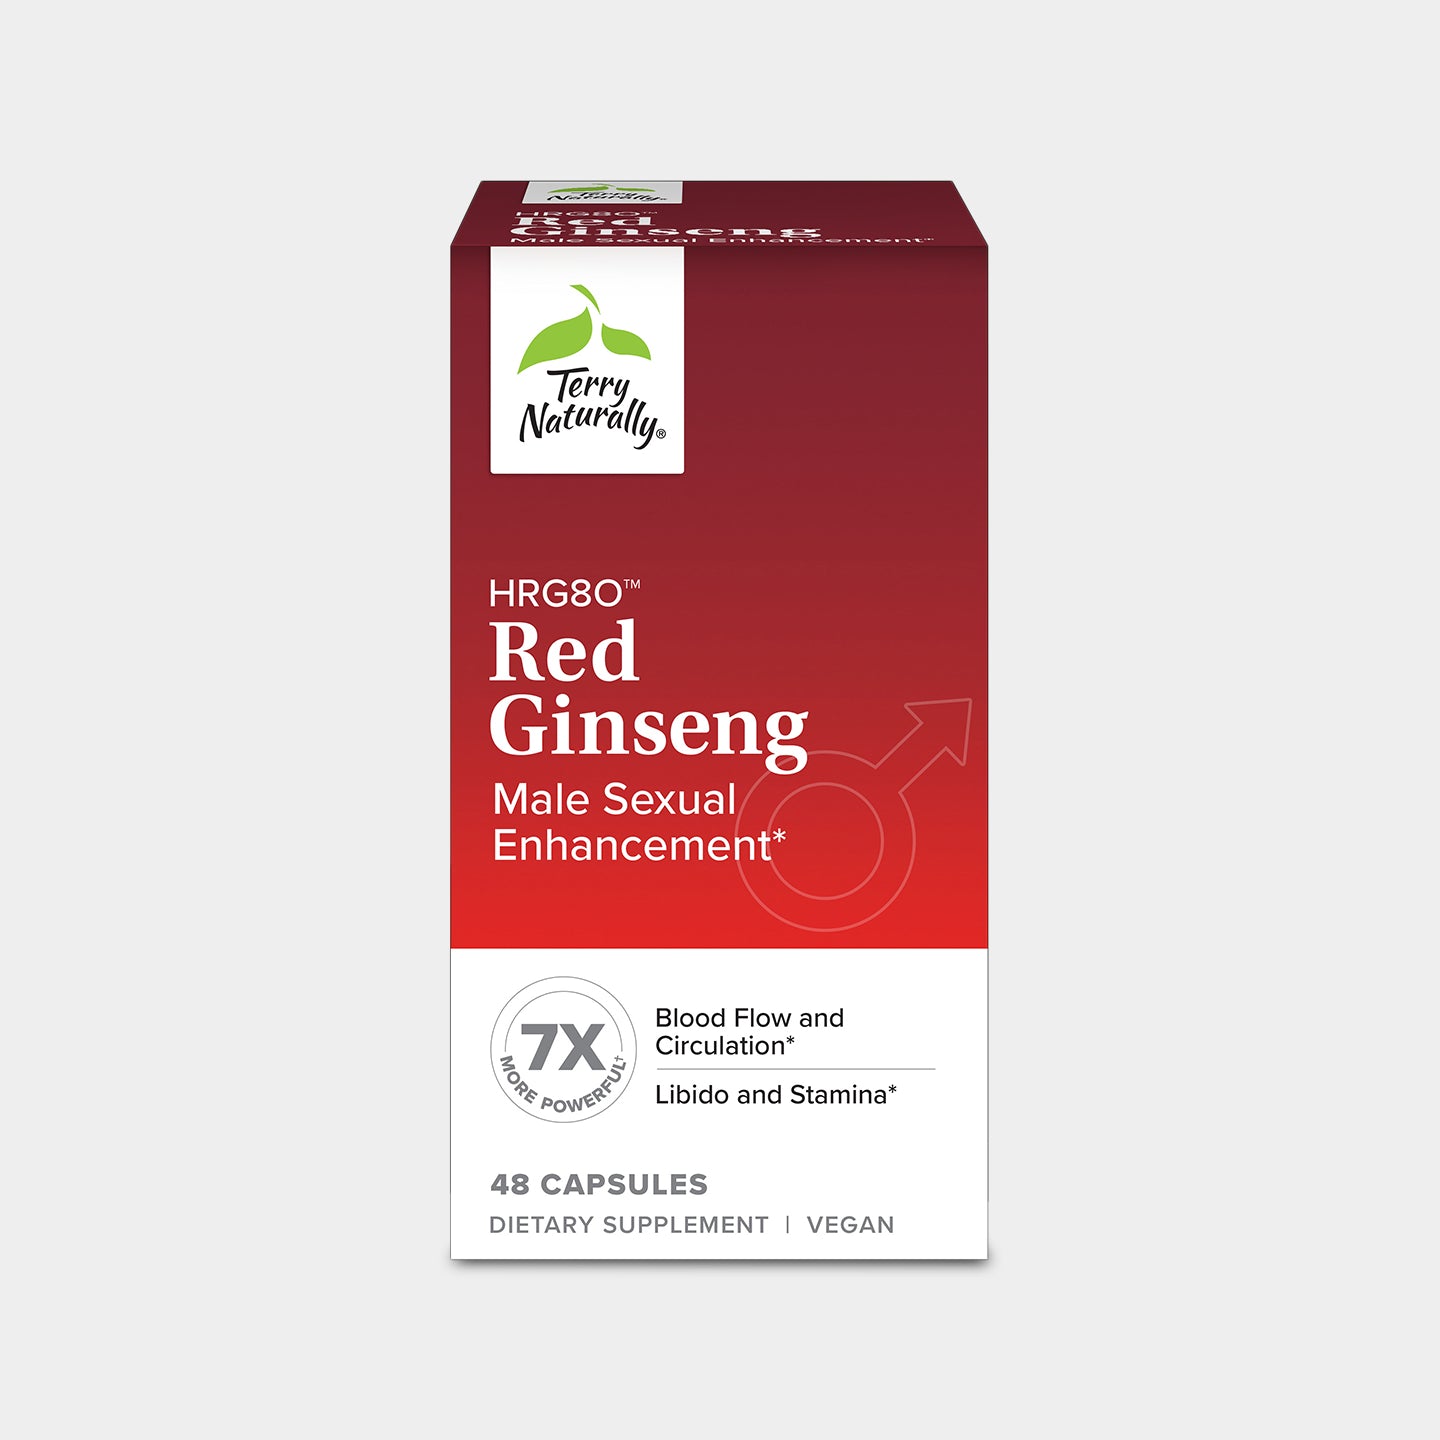 Terry Naturally Red Ginseng Male Sexual Enhanchment A1